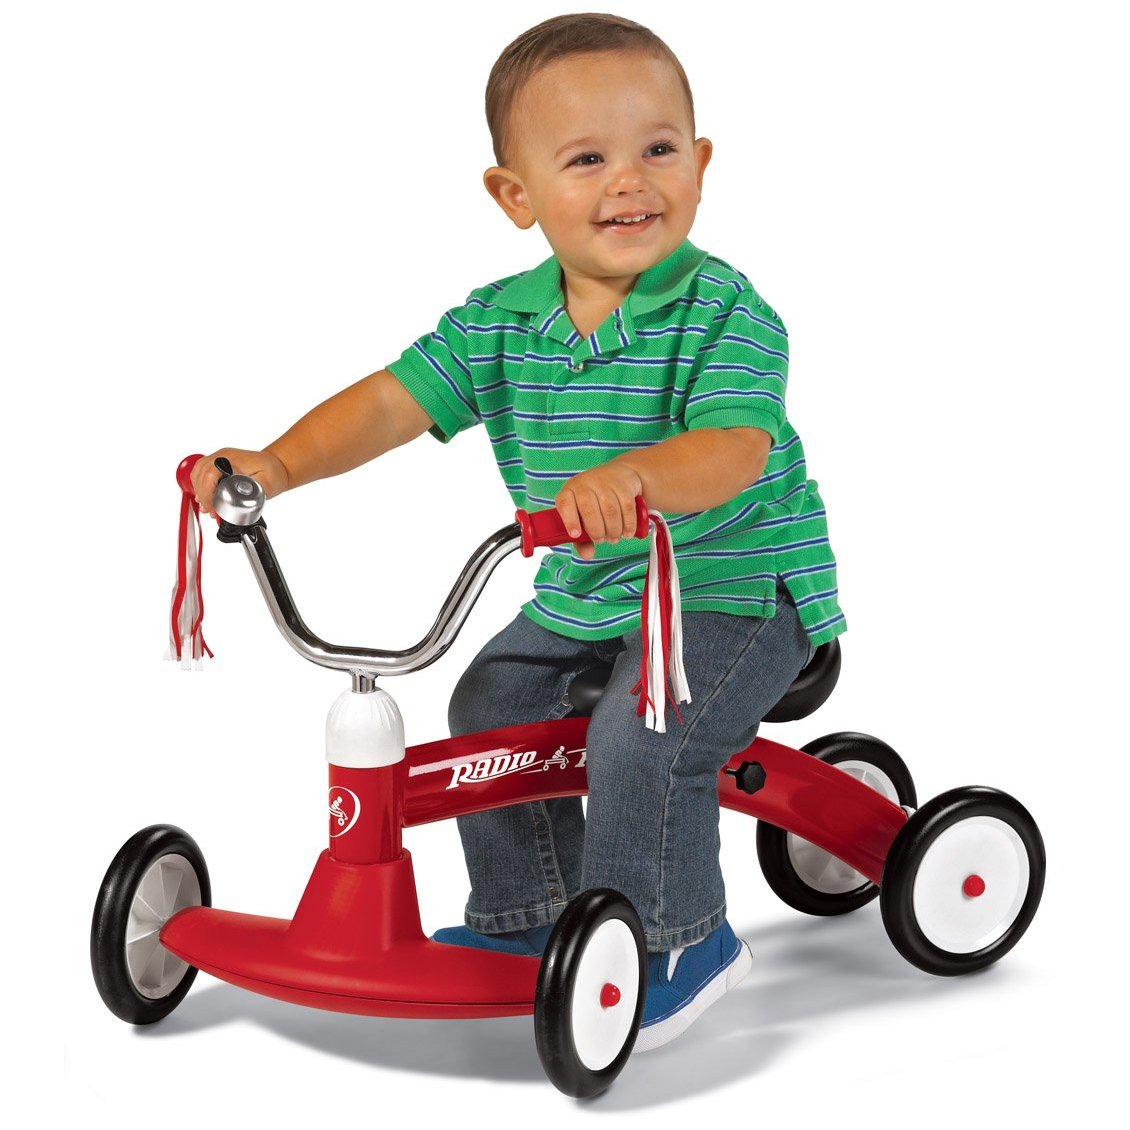 Radio Flyer 33 Classic Dual Deck Kid Toy Tricycle, For Age 2.5 - 5 Years, Red